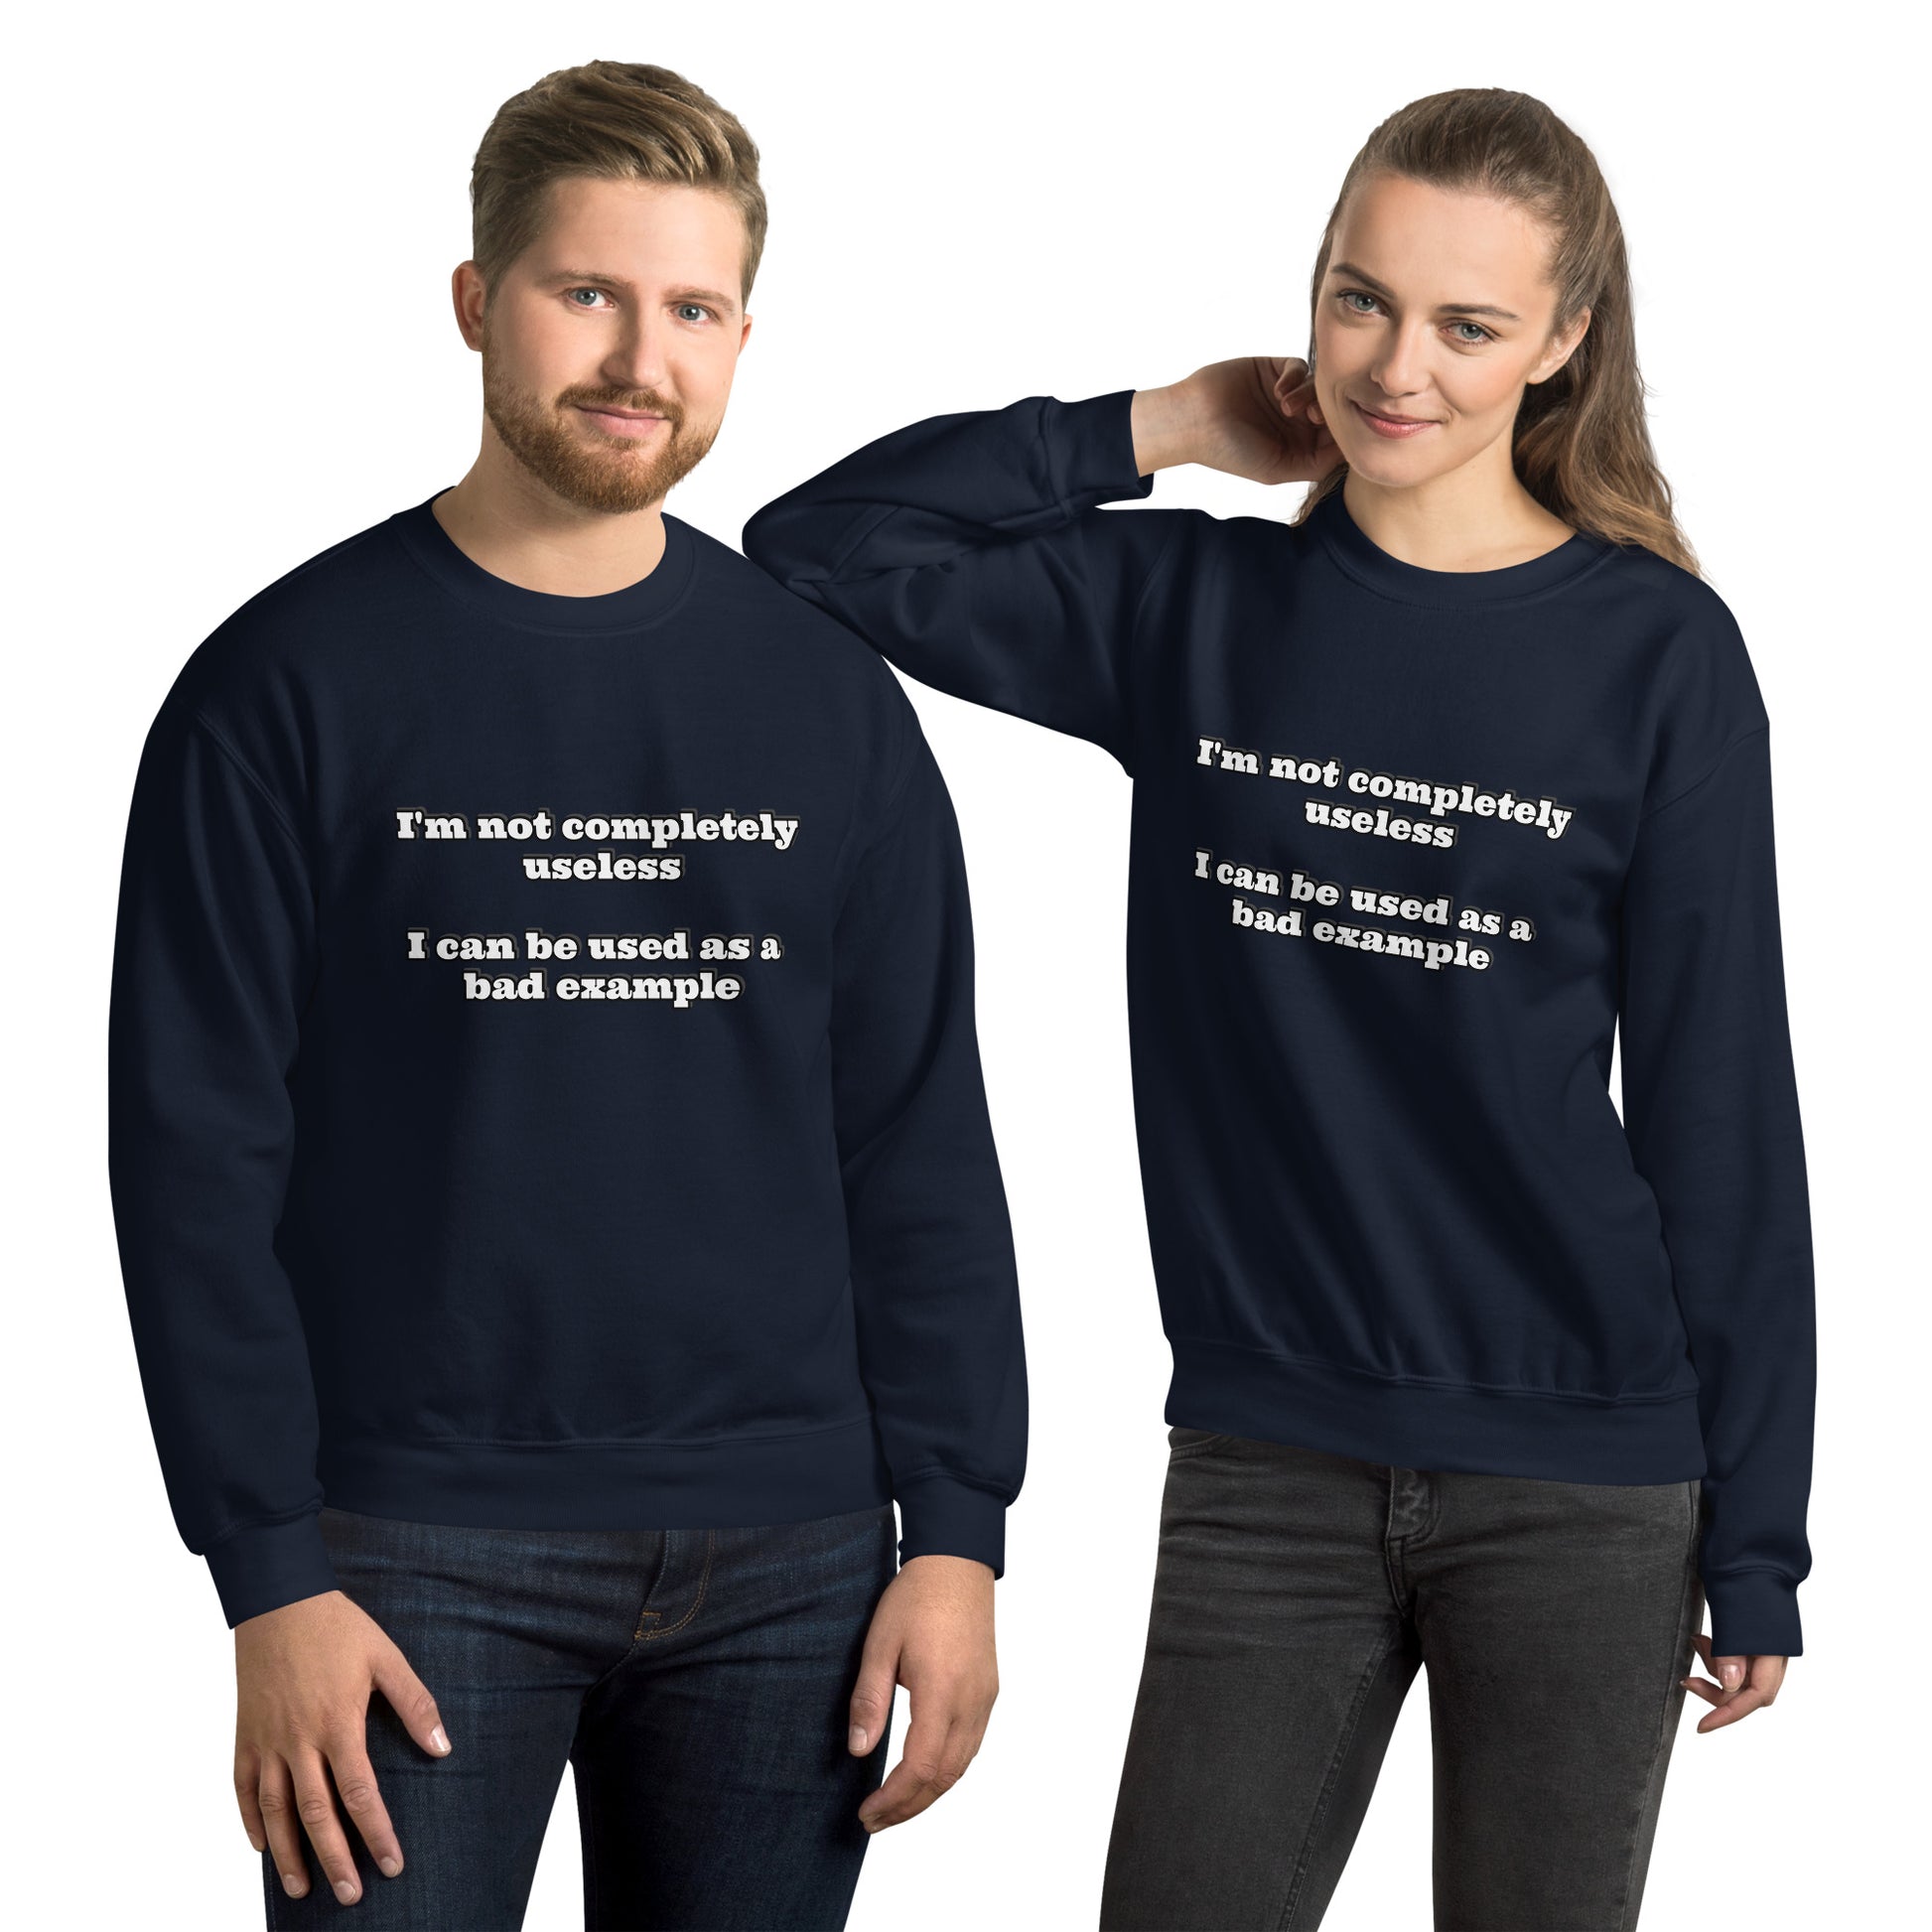 Man and women with navy blue sweatshirt with text “I'm not completely useless I can be used as a bad example”